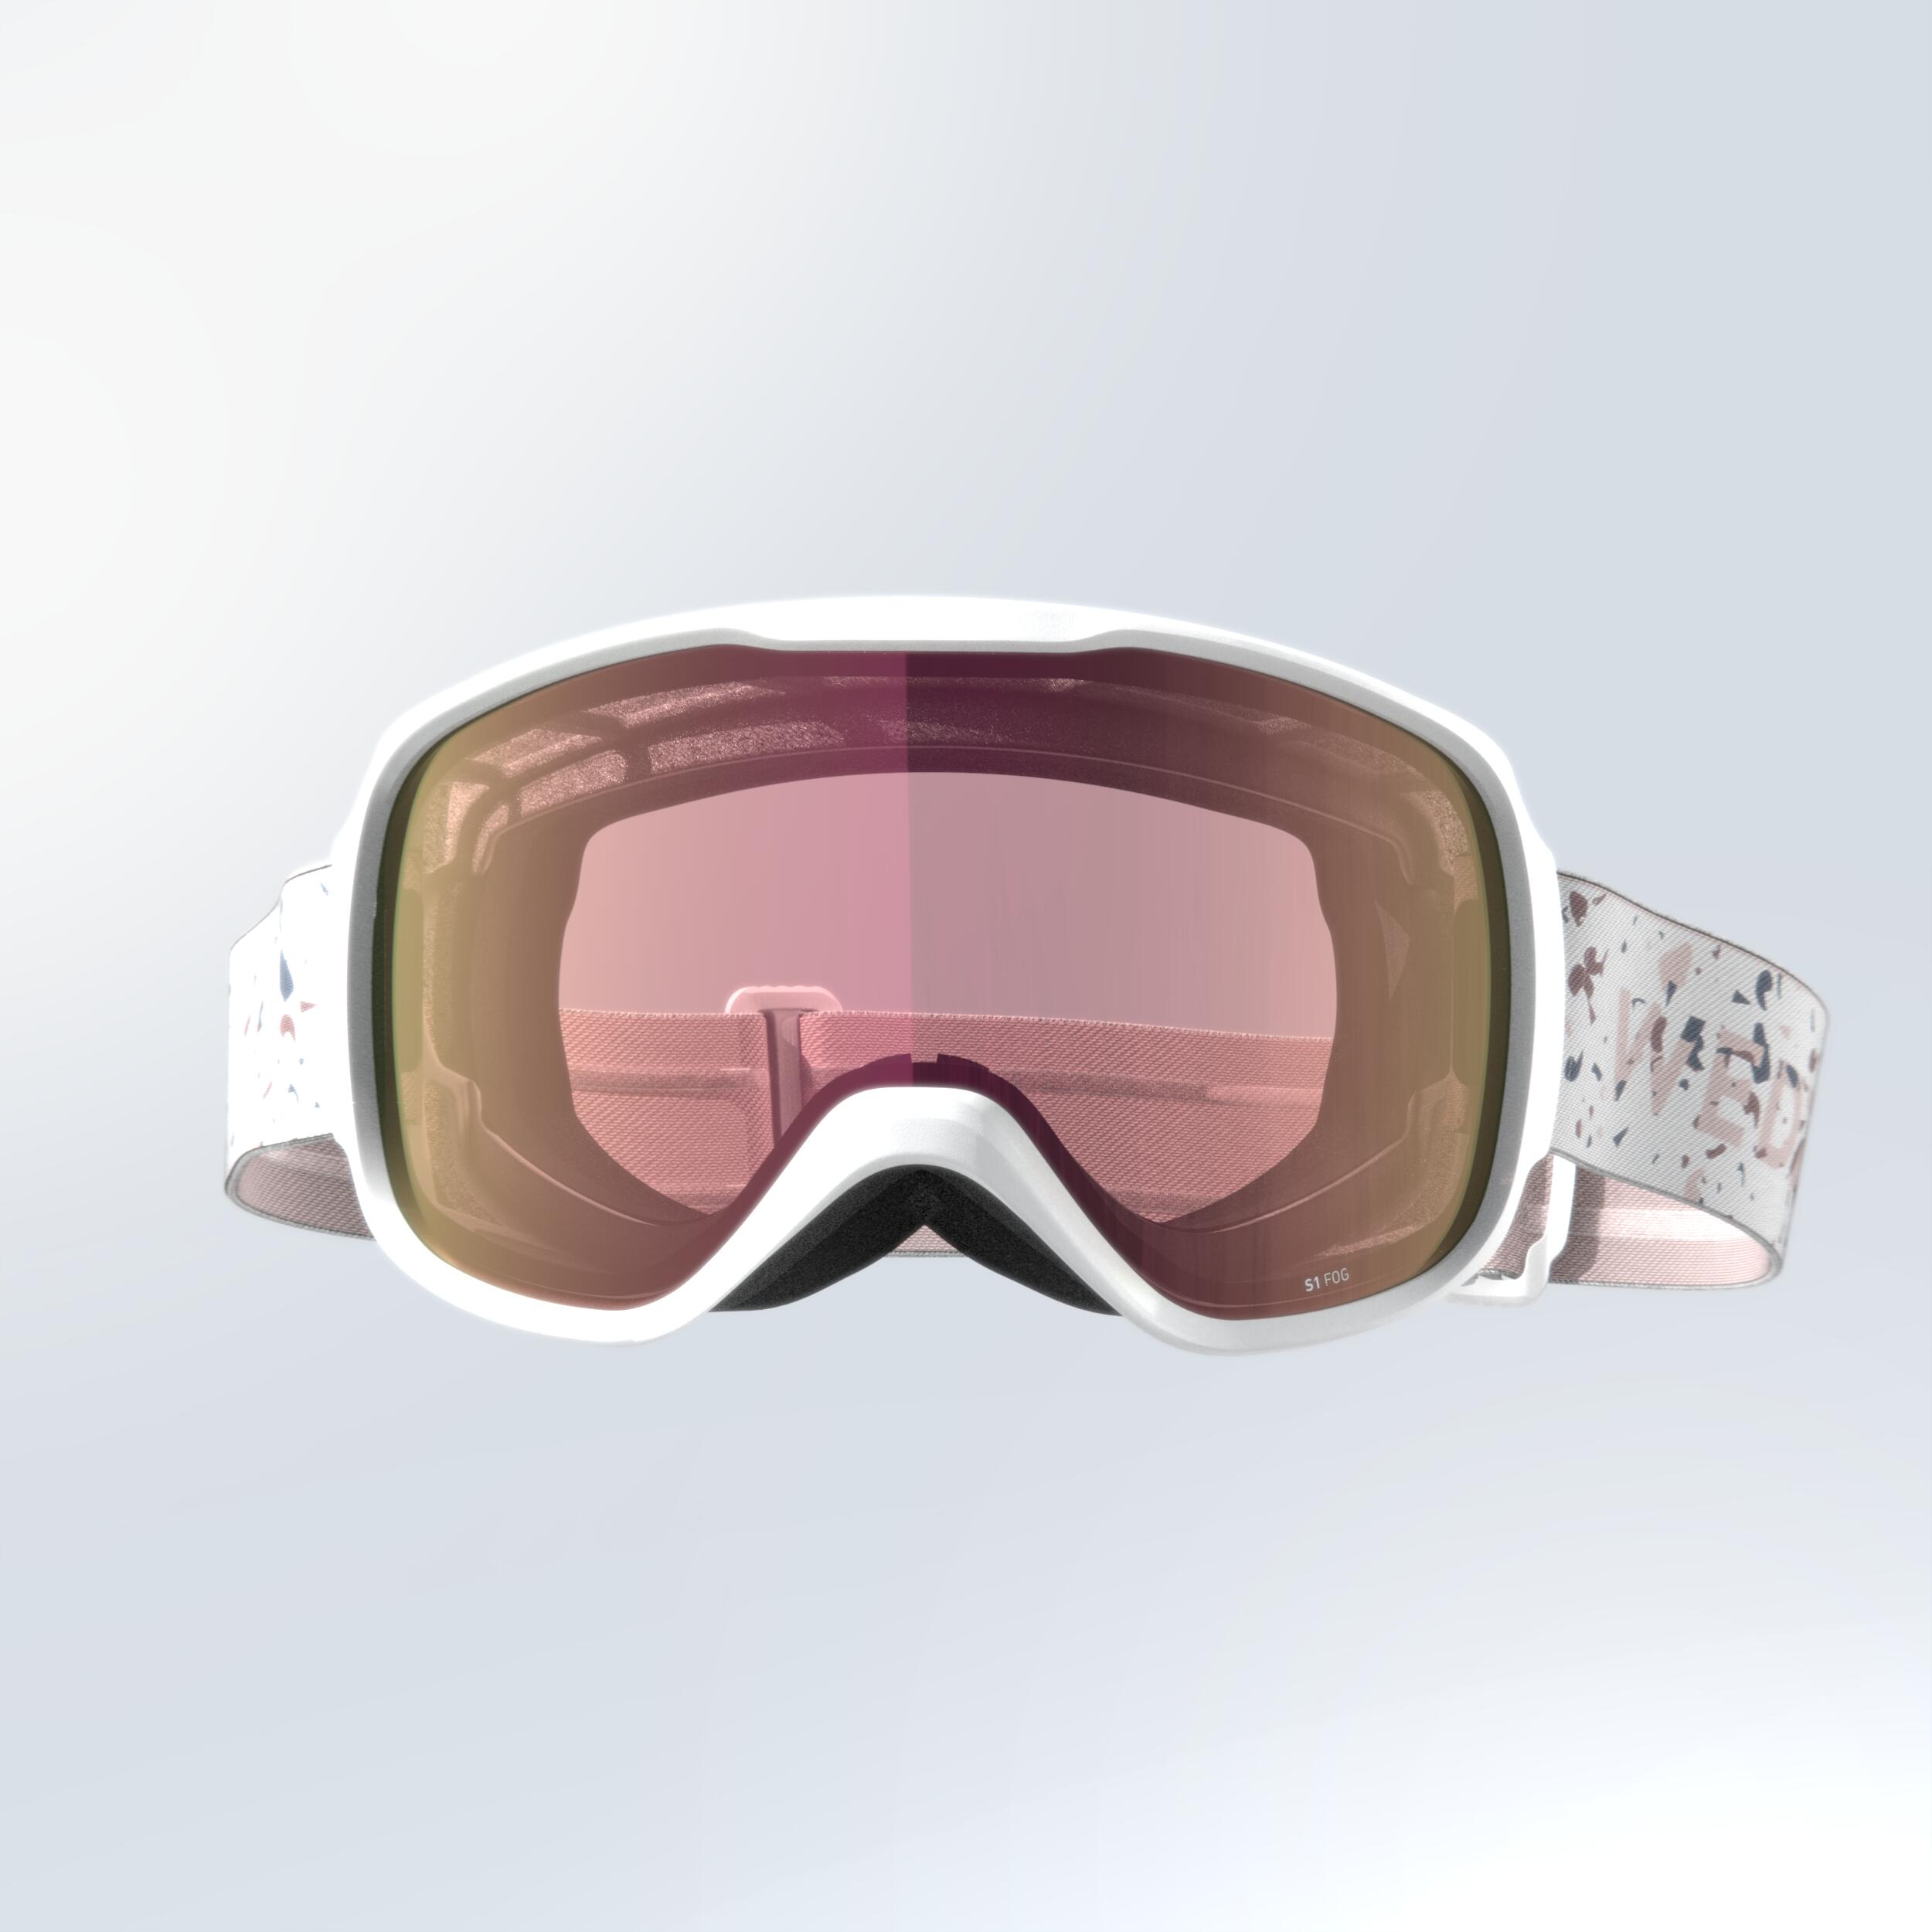 KIDS’ AND ADULTS’ SKIING AND SNOWBOARDING GOGGLES - G 500 S1 - WHITE 4/7